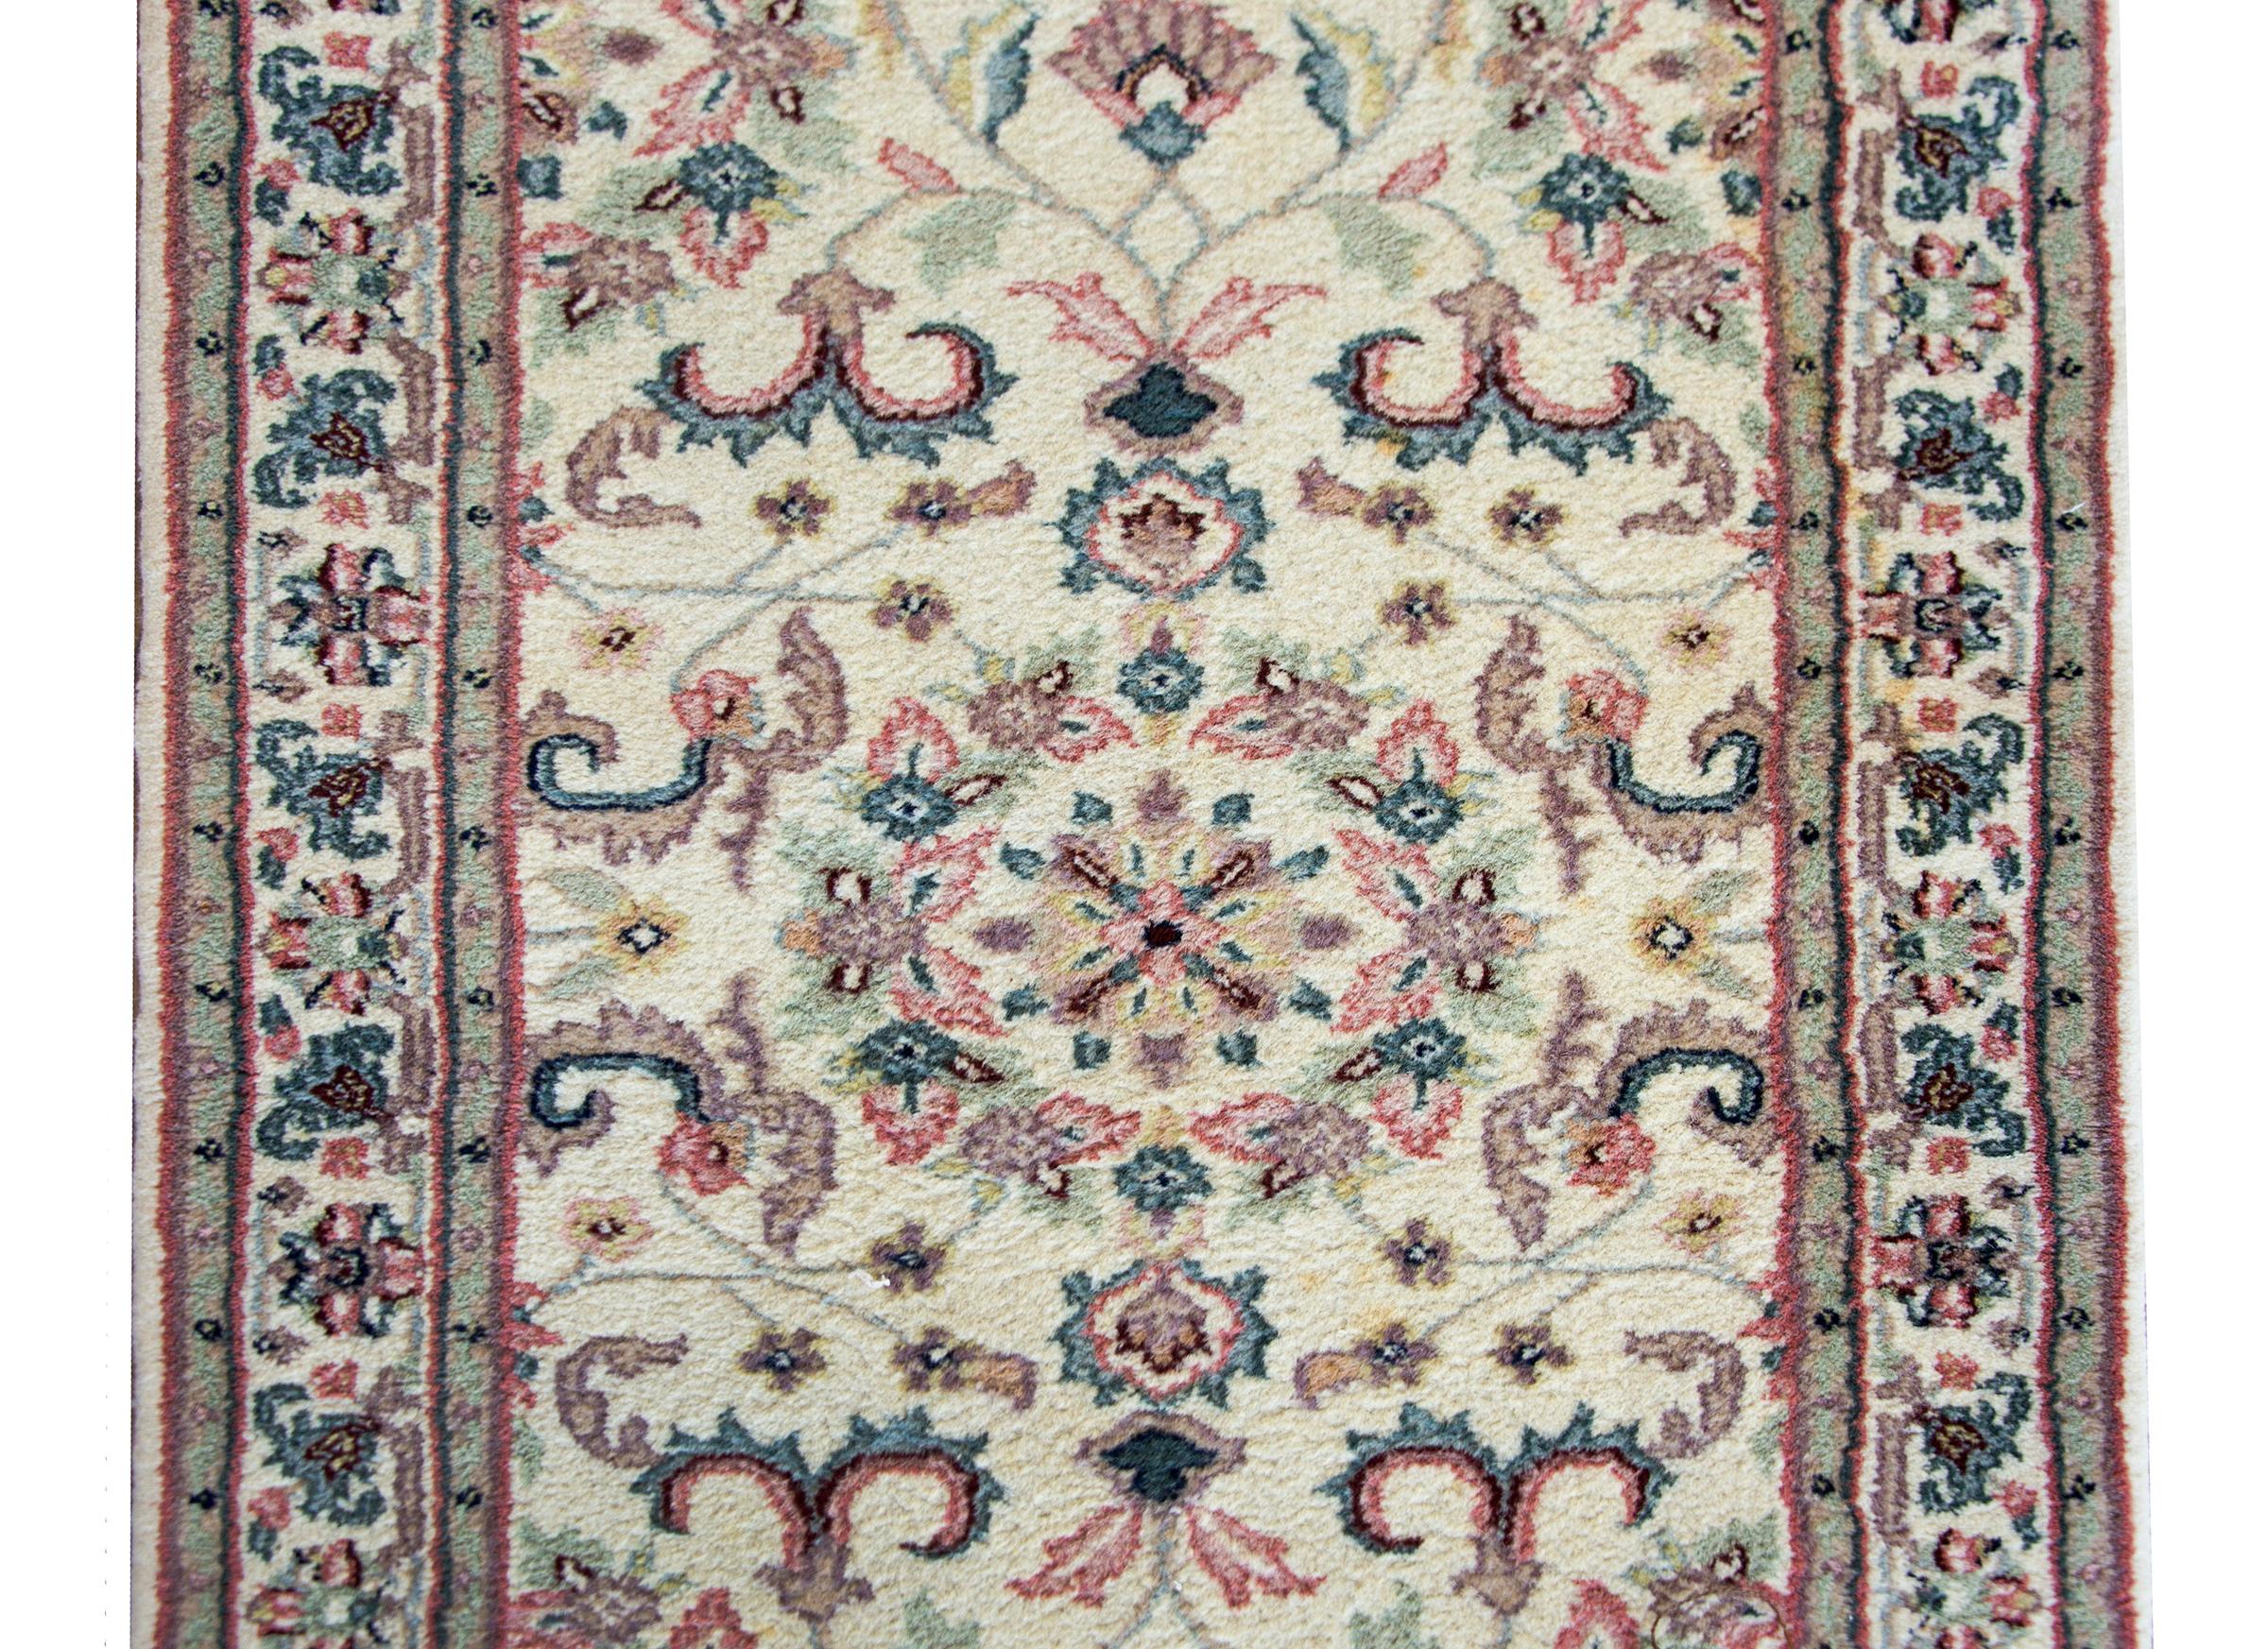 A late 20th century hand-knotted Indian runner with a Persian pattern containing several mirrored stylized floral and scrolling vine patterns surrounded by a simple border with more flowers and scrolling vines, and all woven in pinks, yellows,